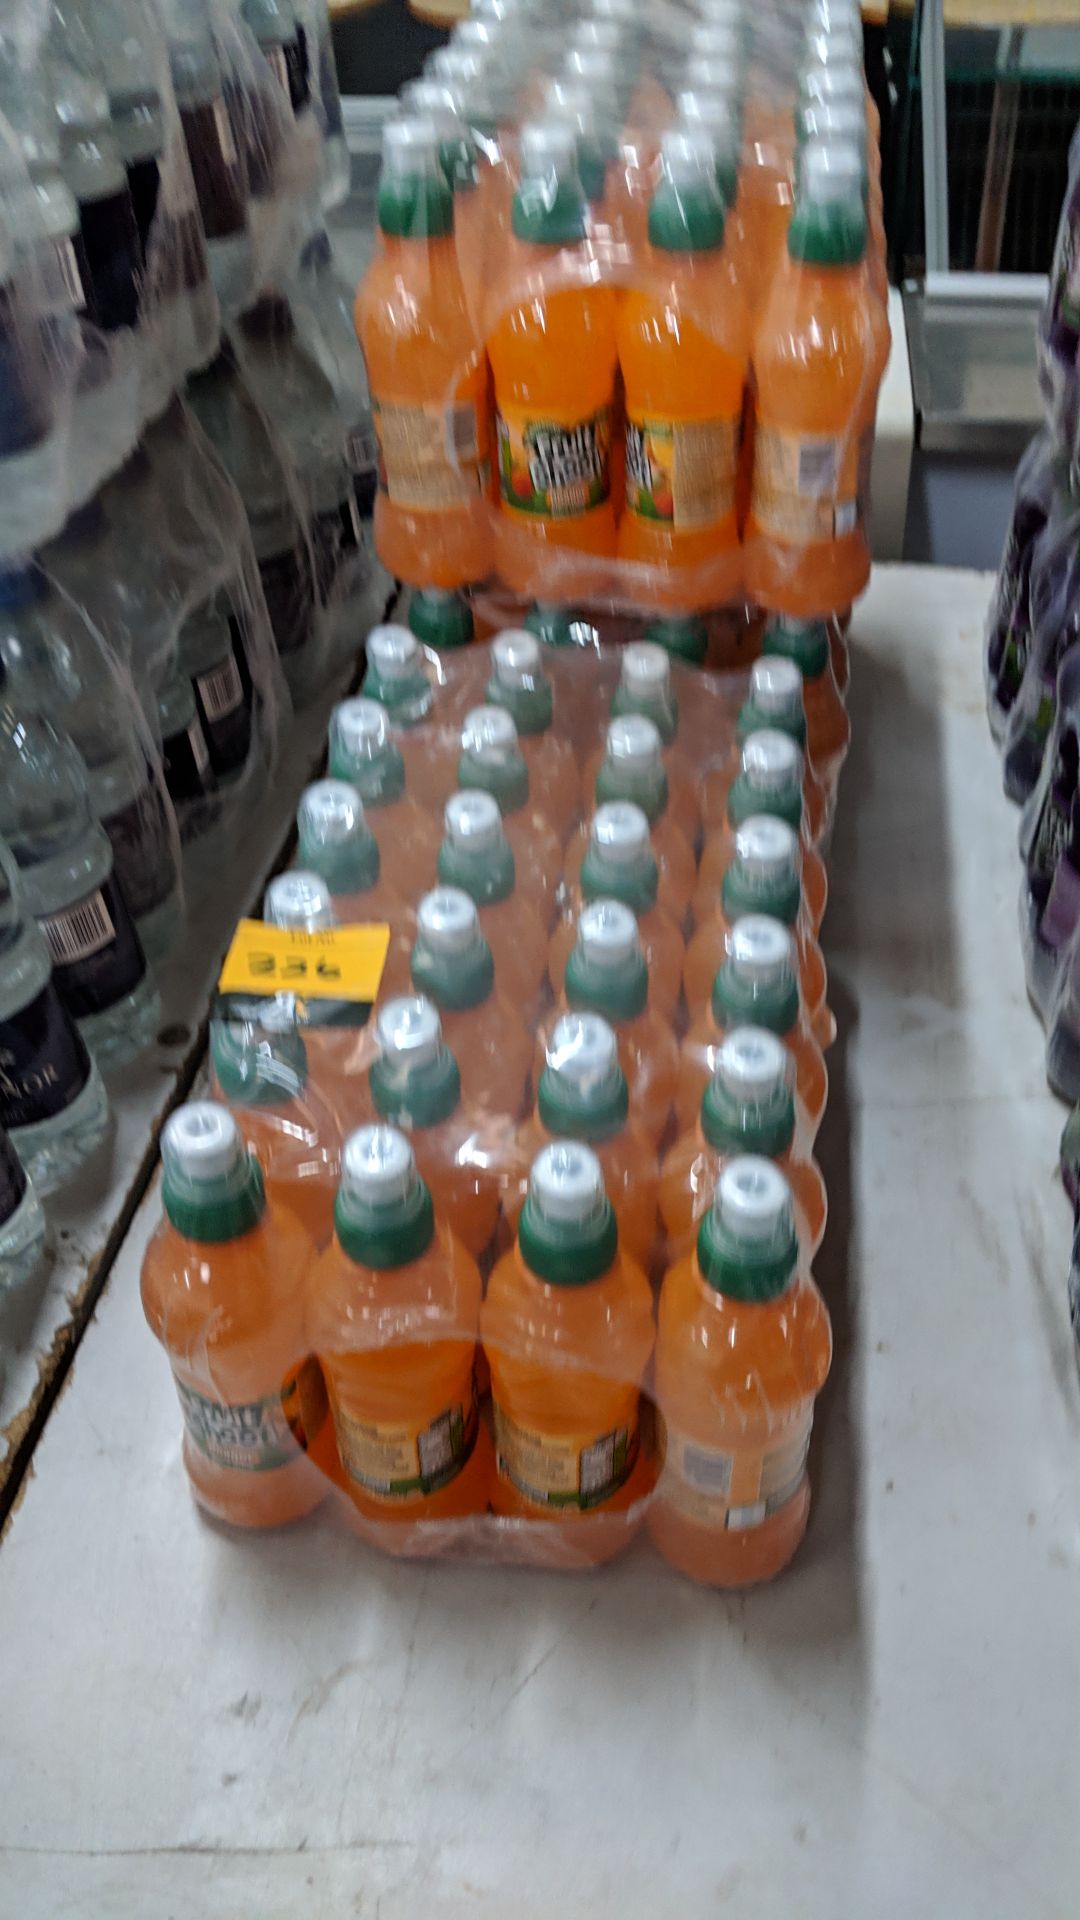 3 cases each containing 24 bottles of Robinsons Orange Fruit Shoot Lots 80 - 95 & 168 - 249 - Image 2 of 4